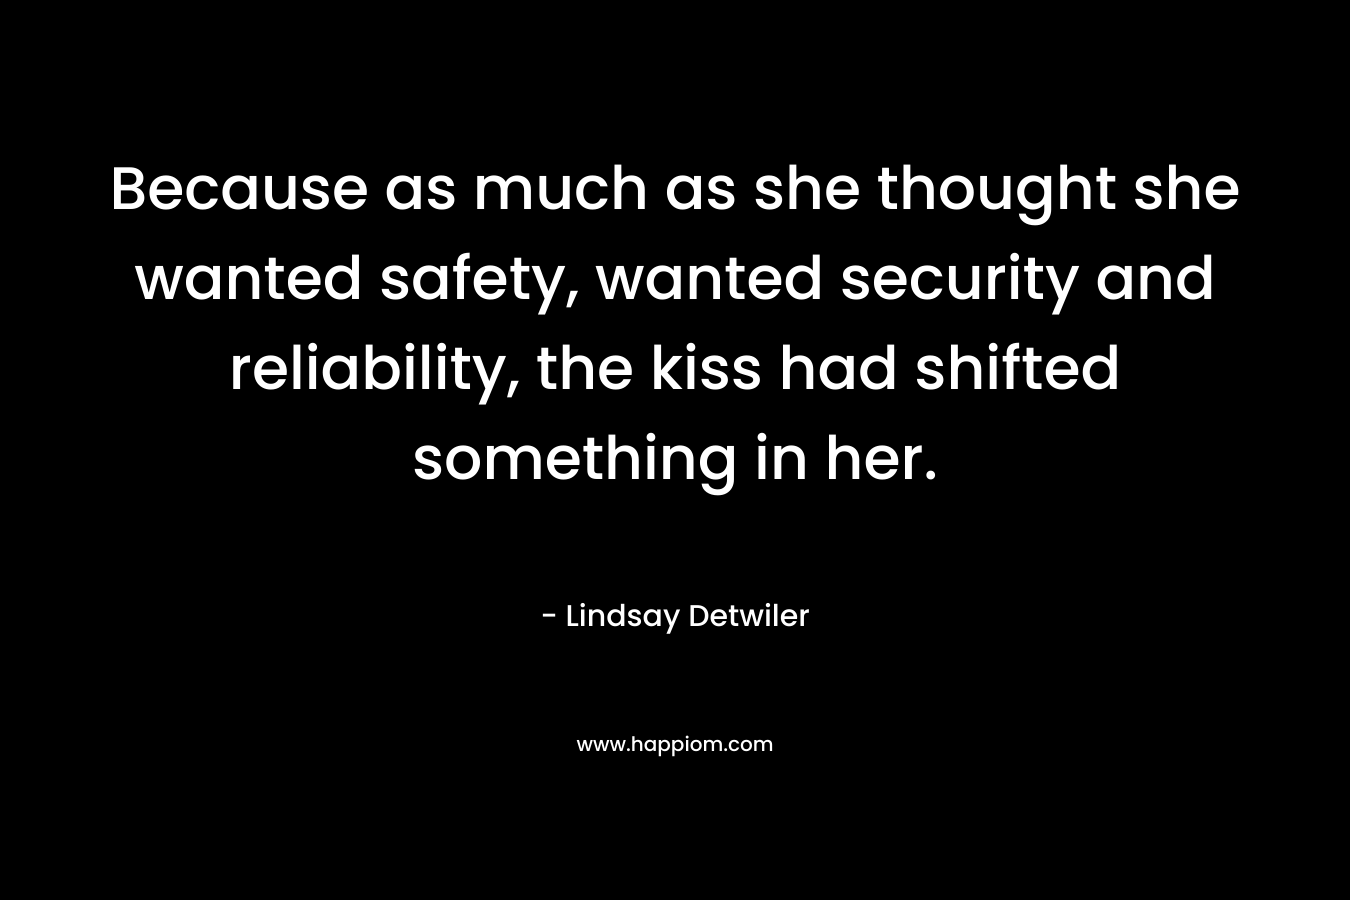 Because as much as she thought she wanted safety, wanted security and reliability, the kiss had shifted something in her. – Lindsay Detwiler